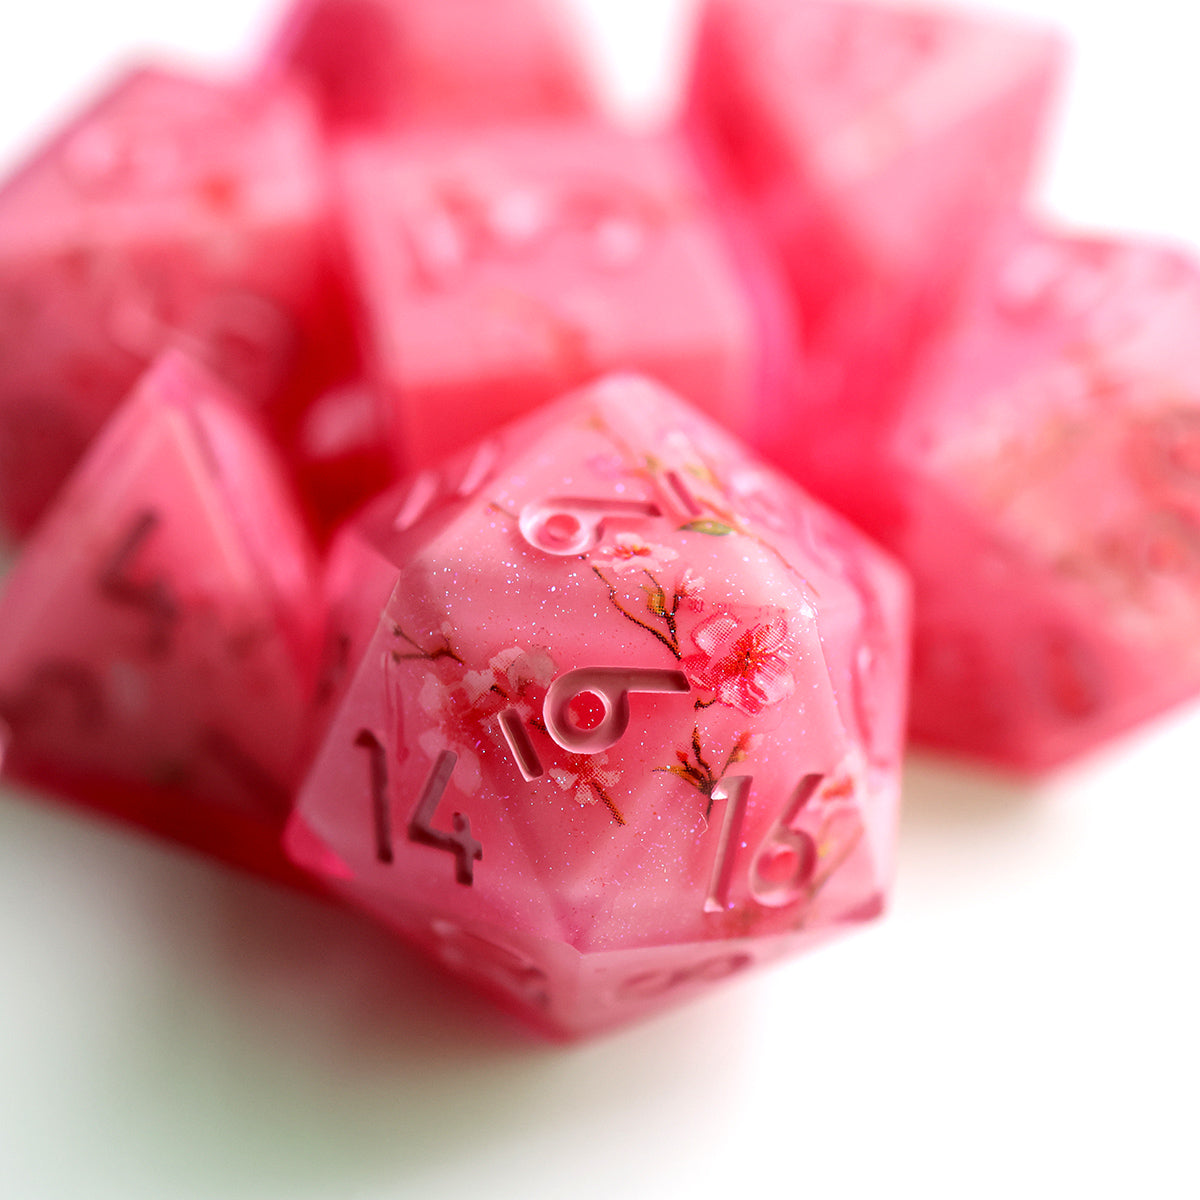 Sukura framed blossom DND dice set, for TTRPG role playing games and dice goblin, dice dragon collectors, available from a UK dice store